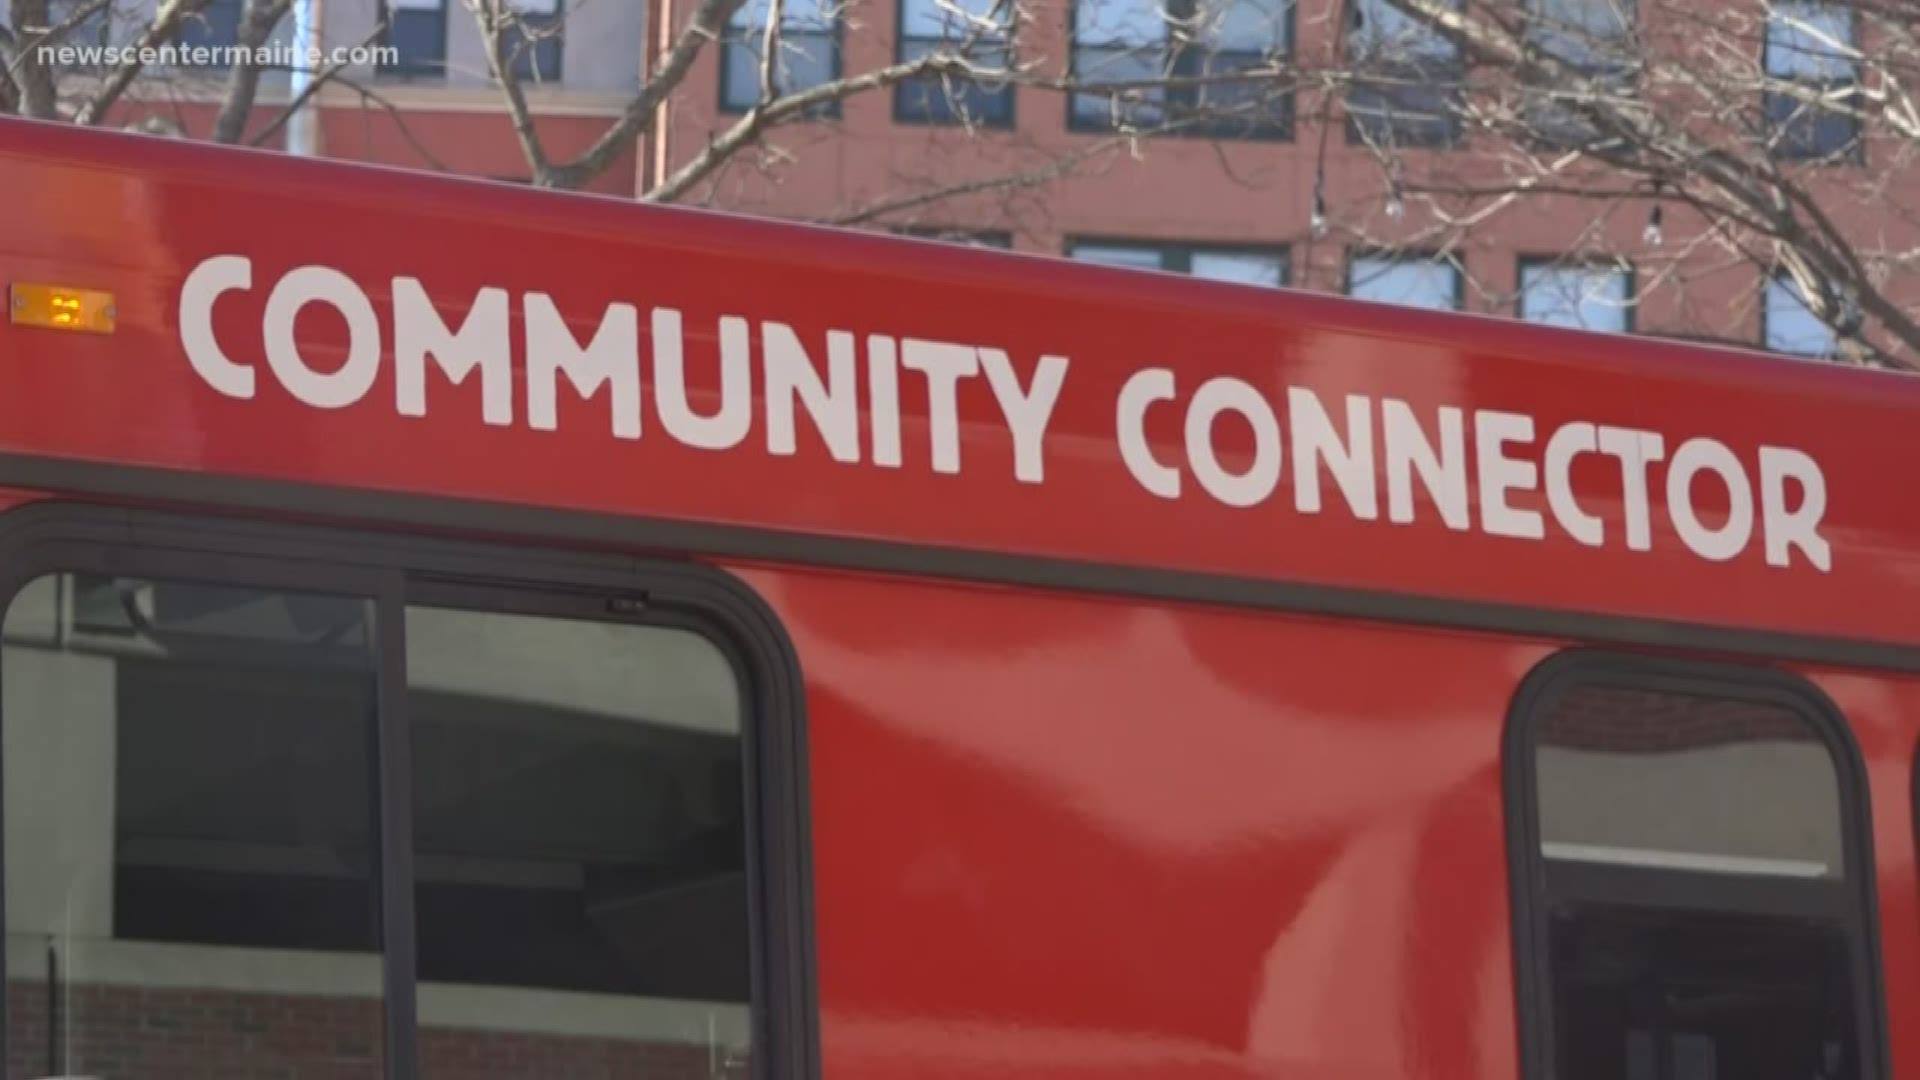 The Community Connector Public Bus System gave free rides as part of 'Bus Rider Appreciation Day.'